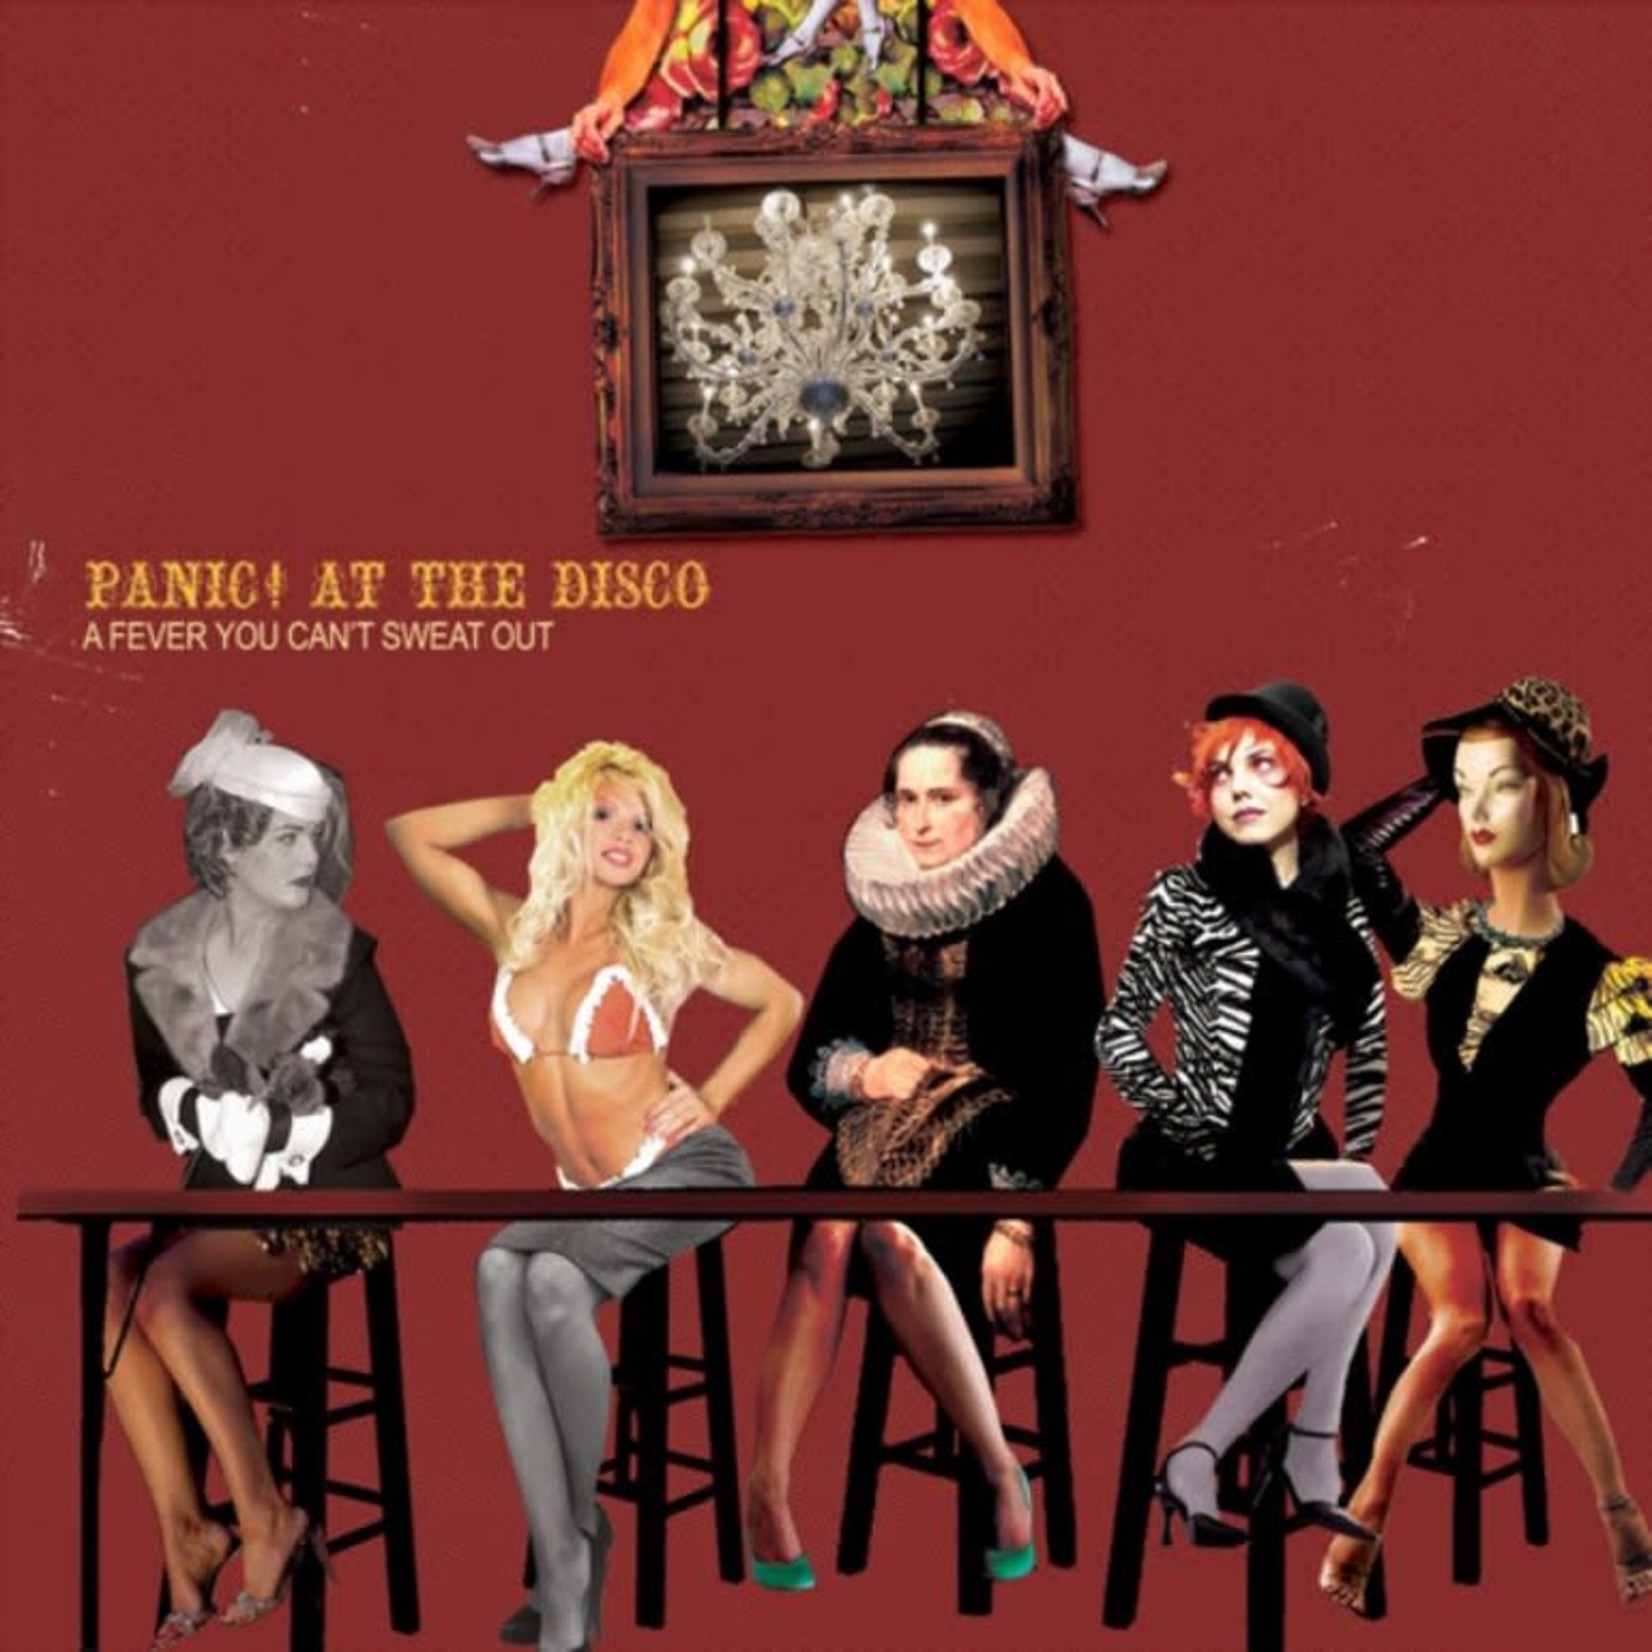 Vinyl Panic At The Disco - A Fever You Can't Sweat Out (limited silver vinyl)